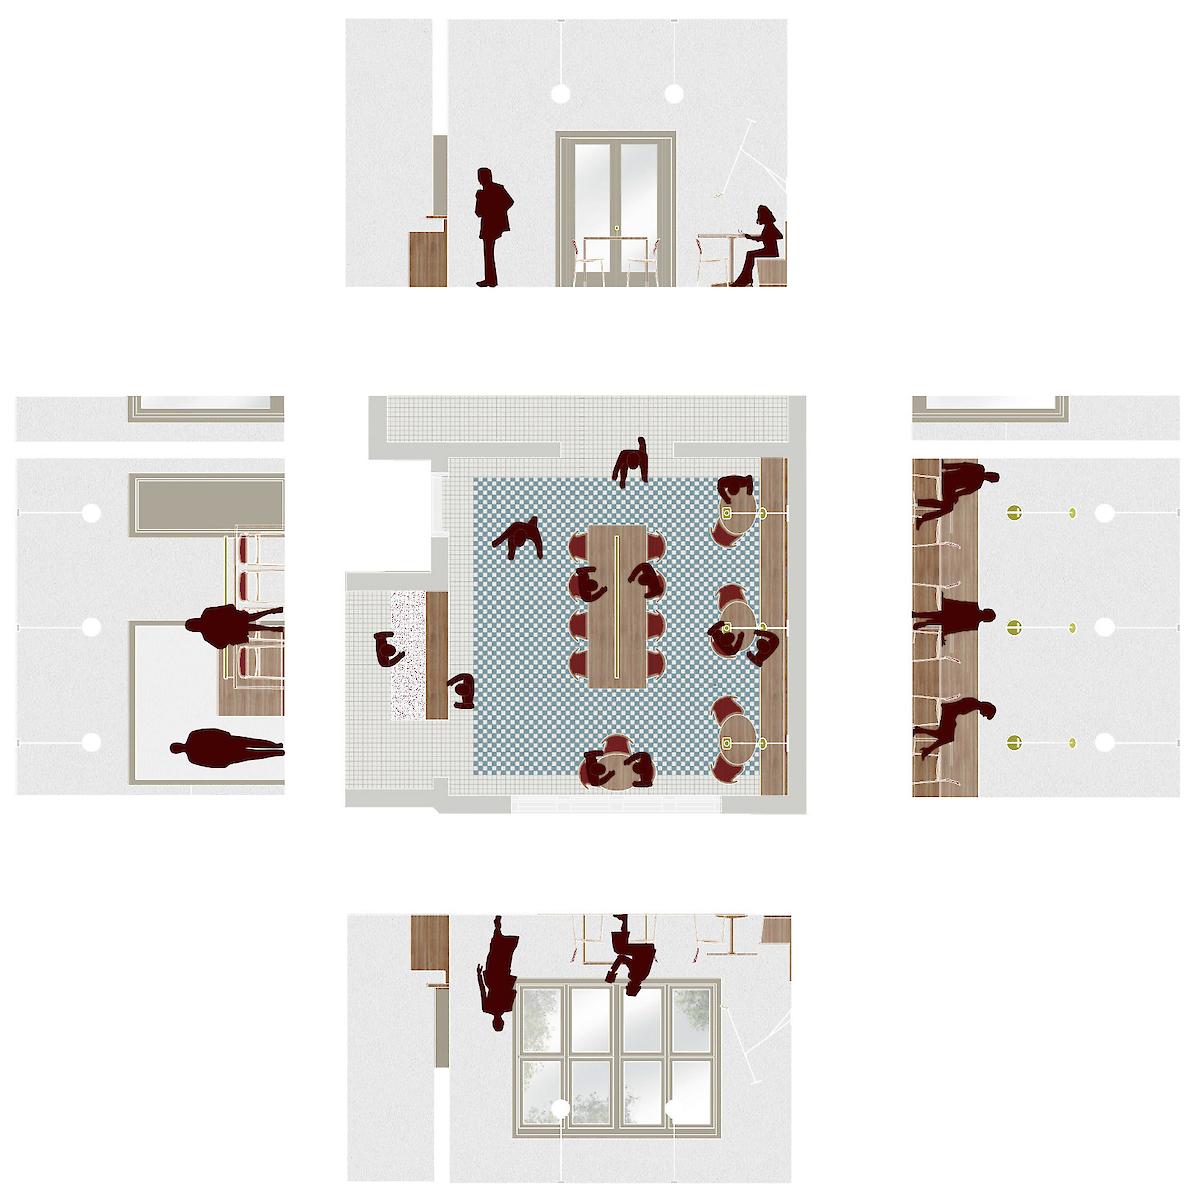 Floor and wall layouts of the cafe